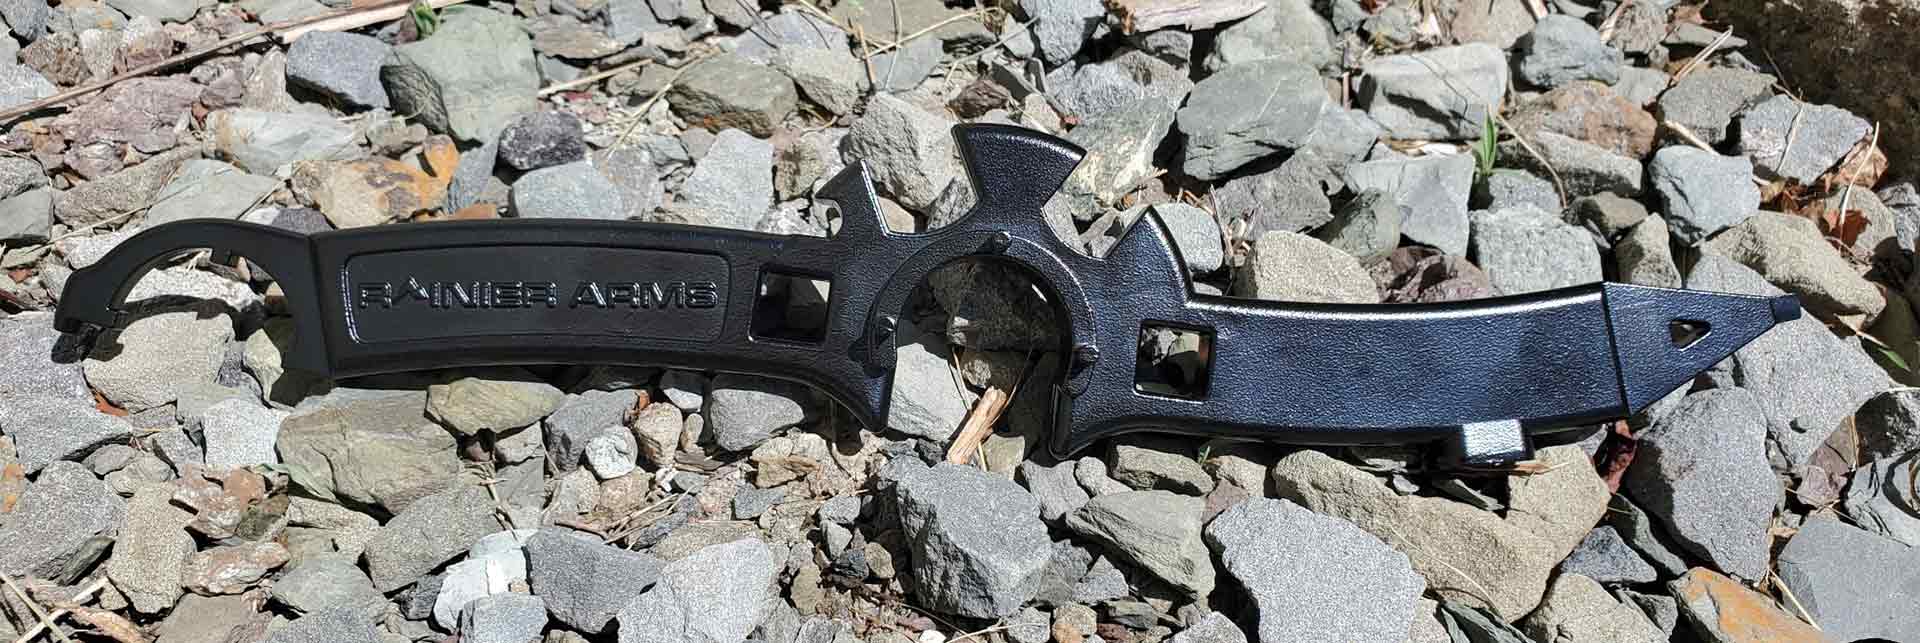 Advanced Armorer's Wrench laying on rocks